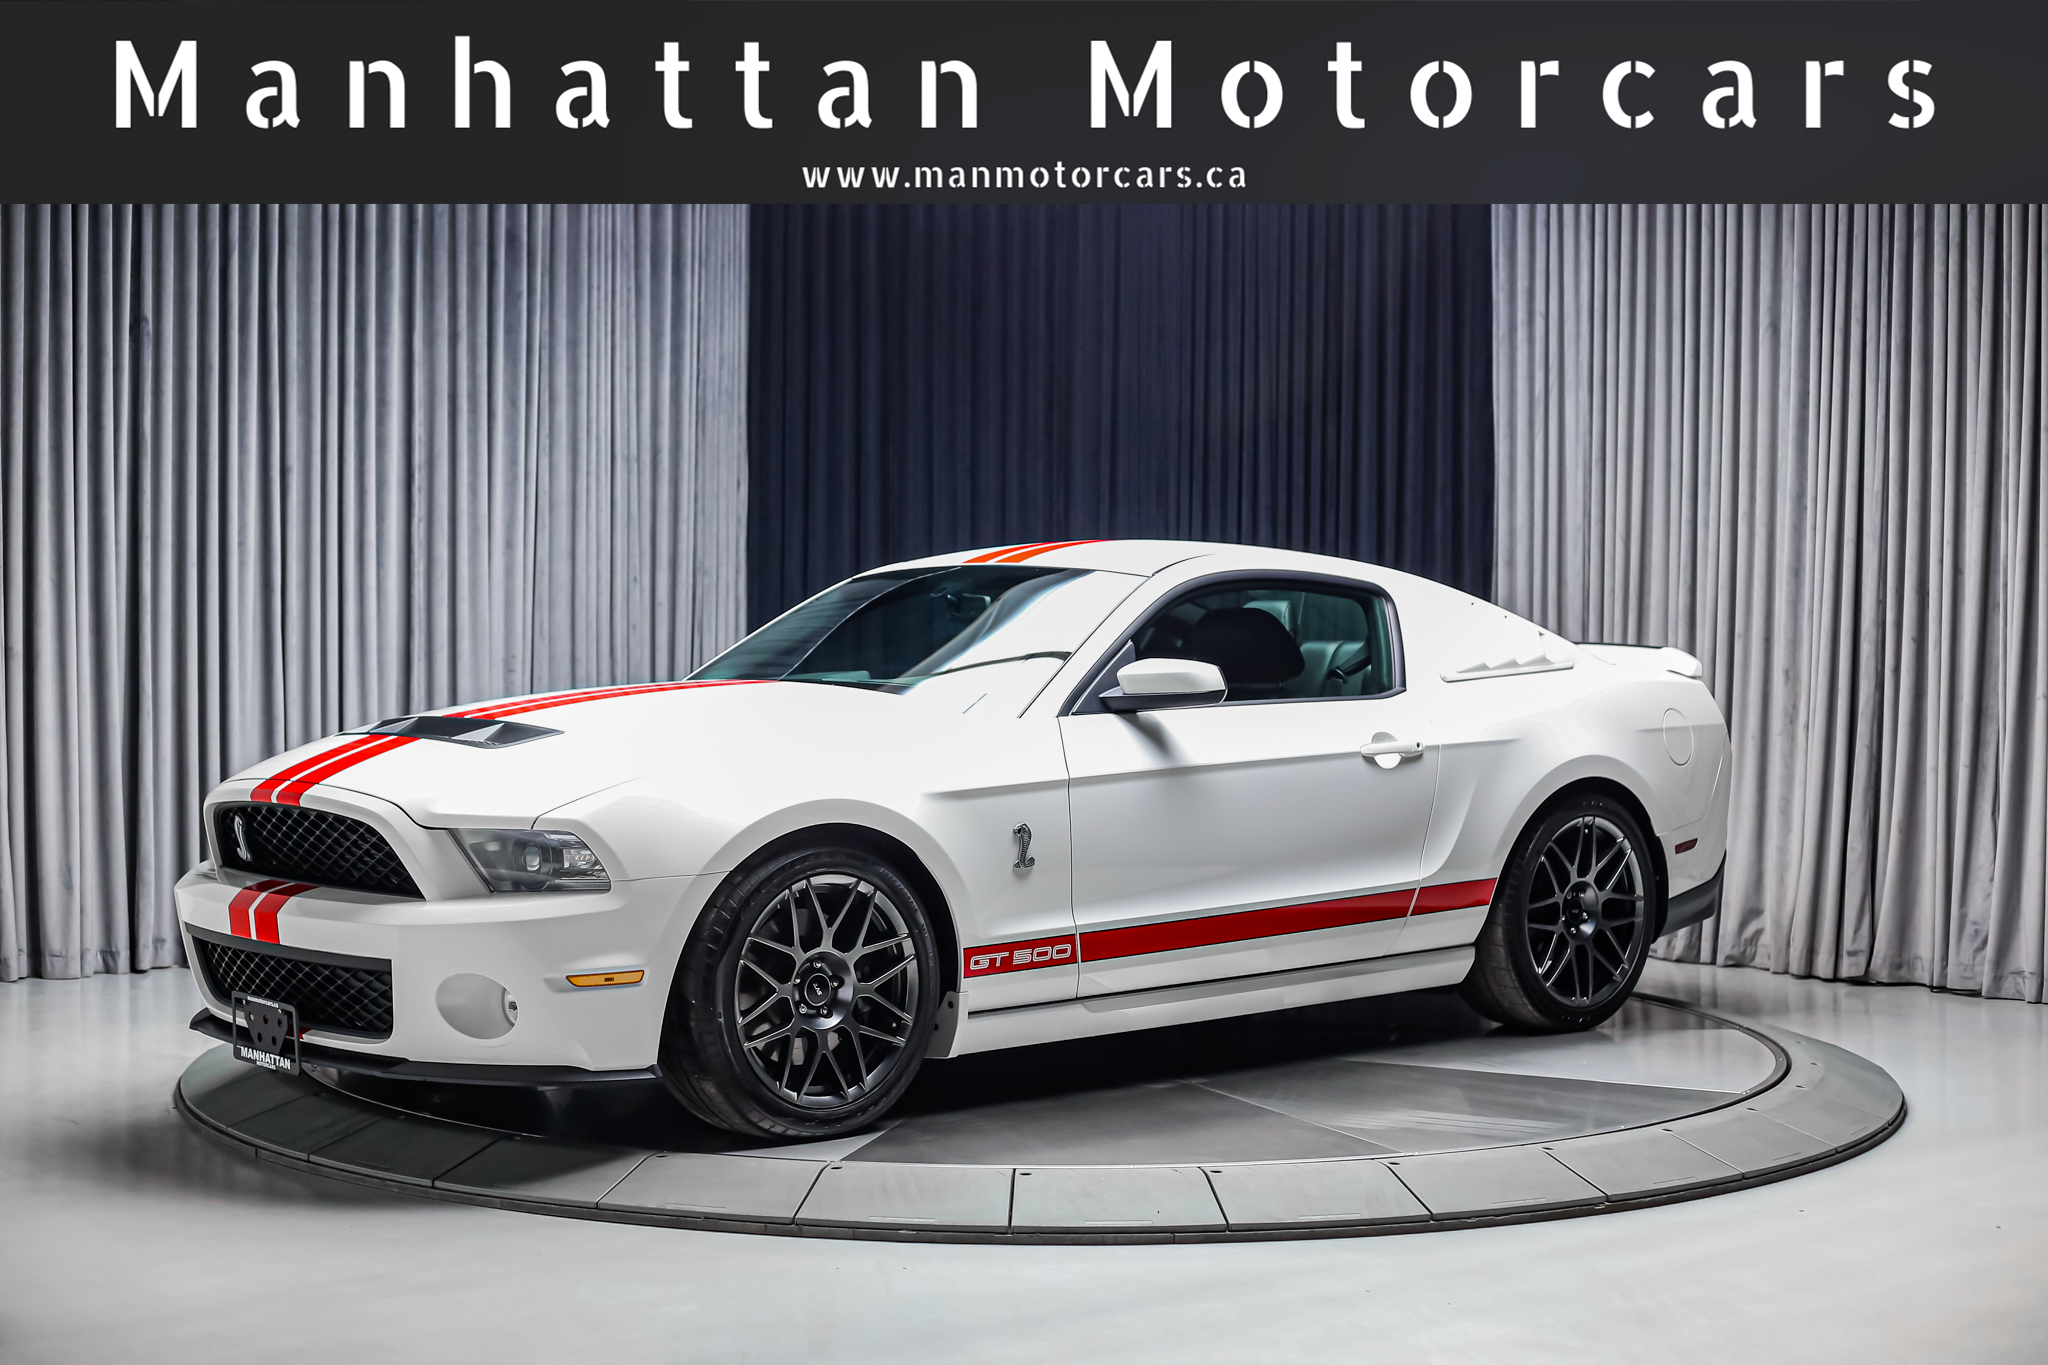 2012 Ford Mustang SHELBY GT 500 5.4L 550HP |SVTPERFORMANCEPKG|LOWKMS